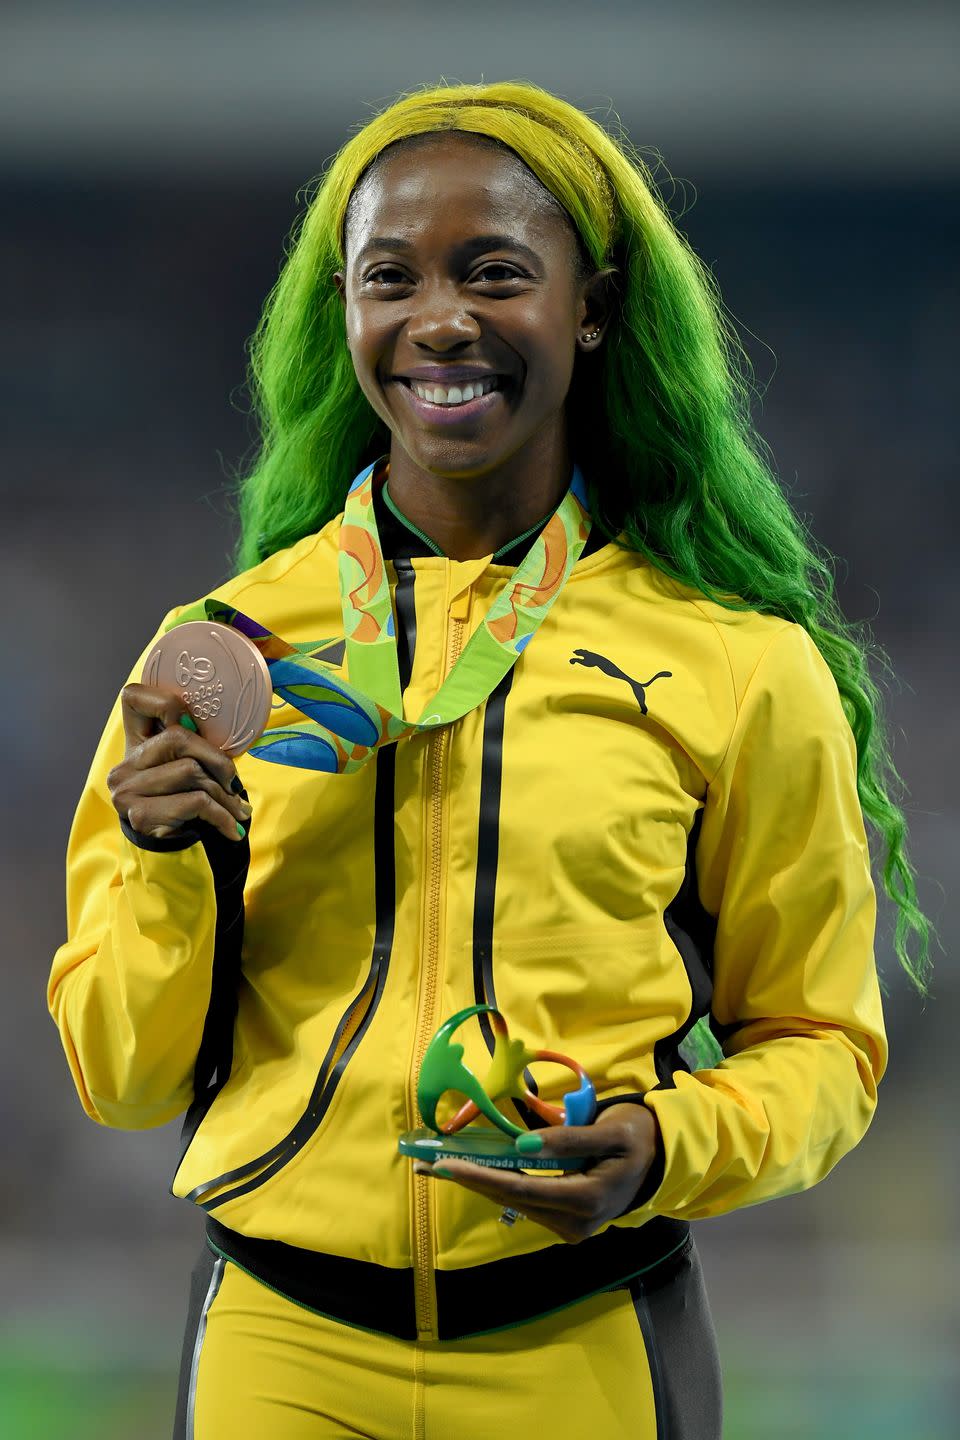 <p>Fraser-Pryce is a six-time Olympic medallist, the first Caribbean woman to win gold in the 100m and one of only three women ever to defend a standing Olympic 100m title. Competing in the 100 and 200 metres, Fraser-Pryce is the only sprinter in history (of any gender) to win four World Championship 100 metre titles, as well as being the winner of more global titles than a single other female sprinter ever. </p>